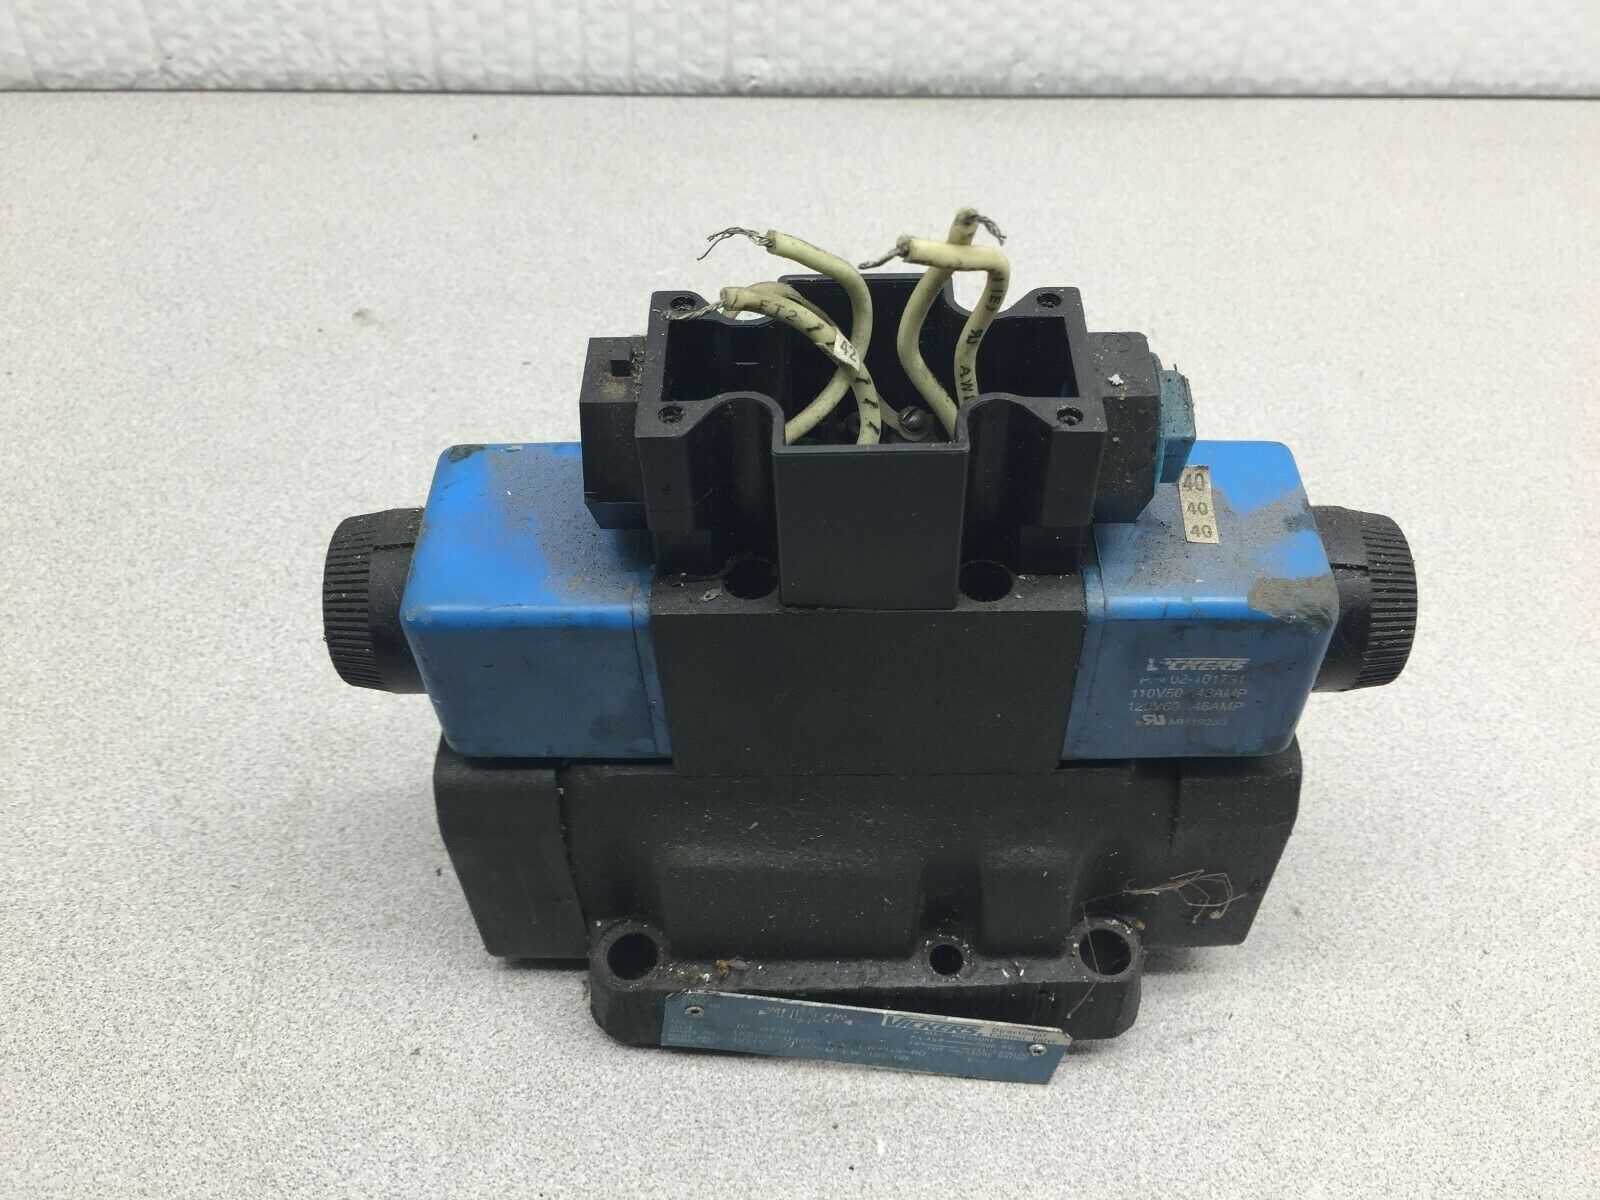 USED VICKERS 120 VAC COIL DIRECTIONAL CONTROL VALVE 02-127392